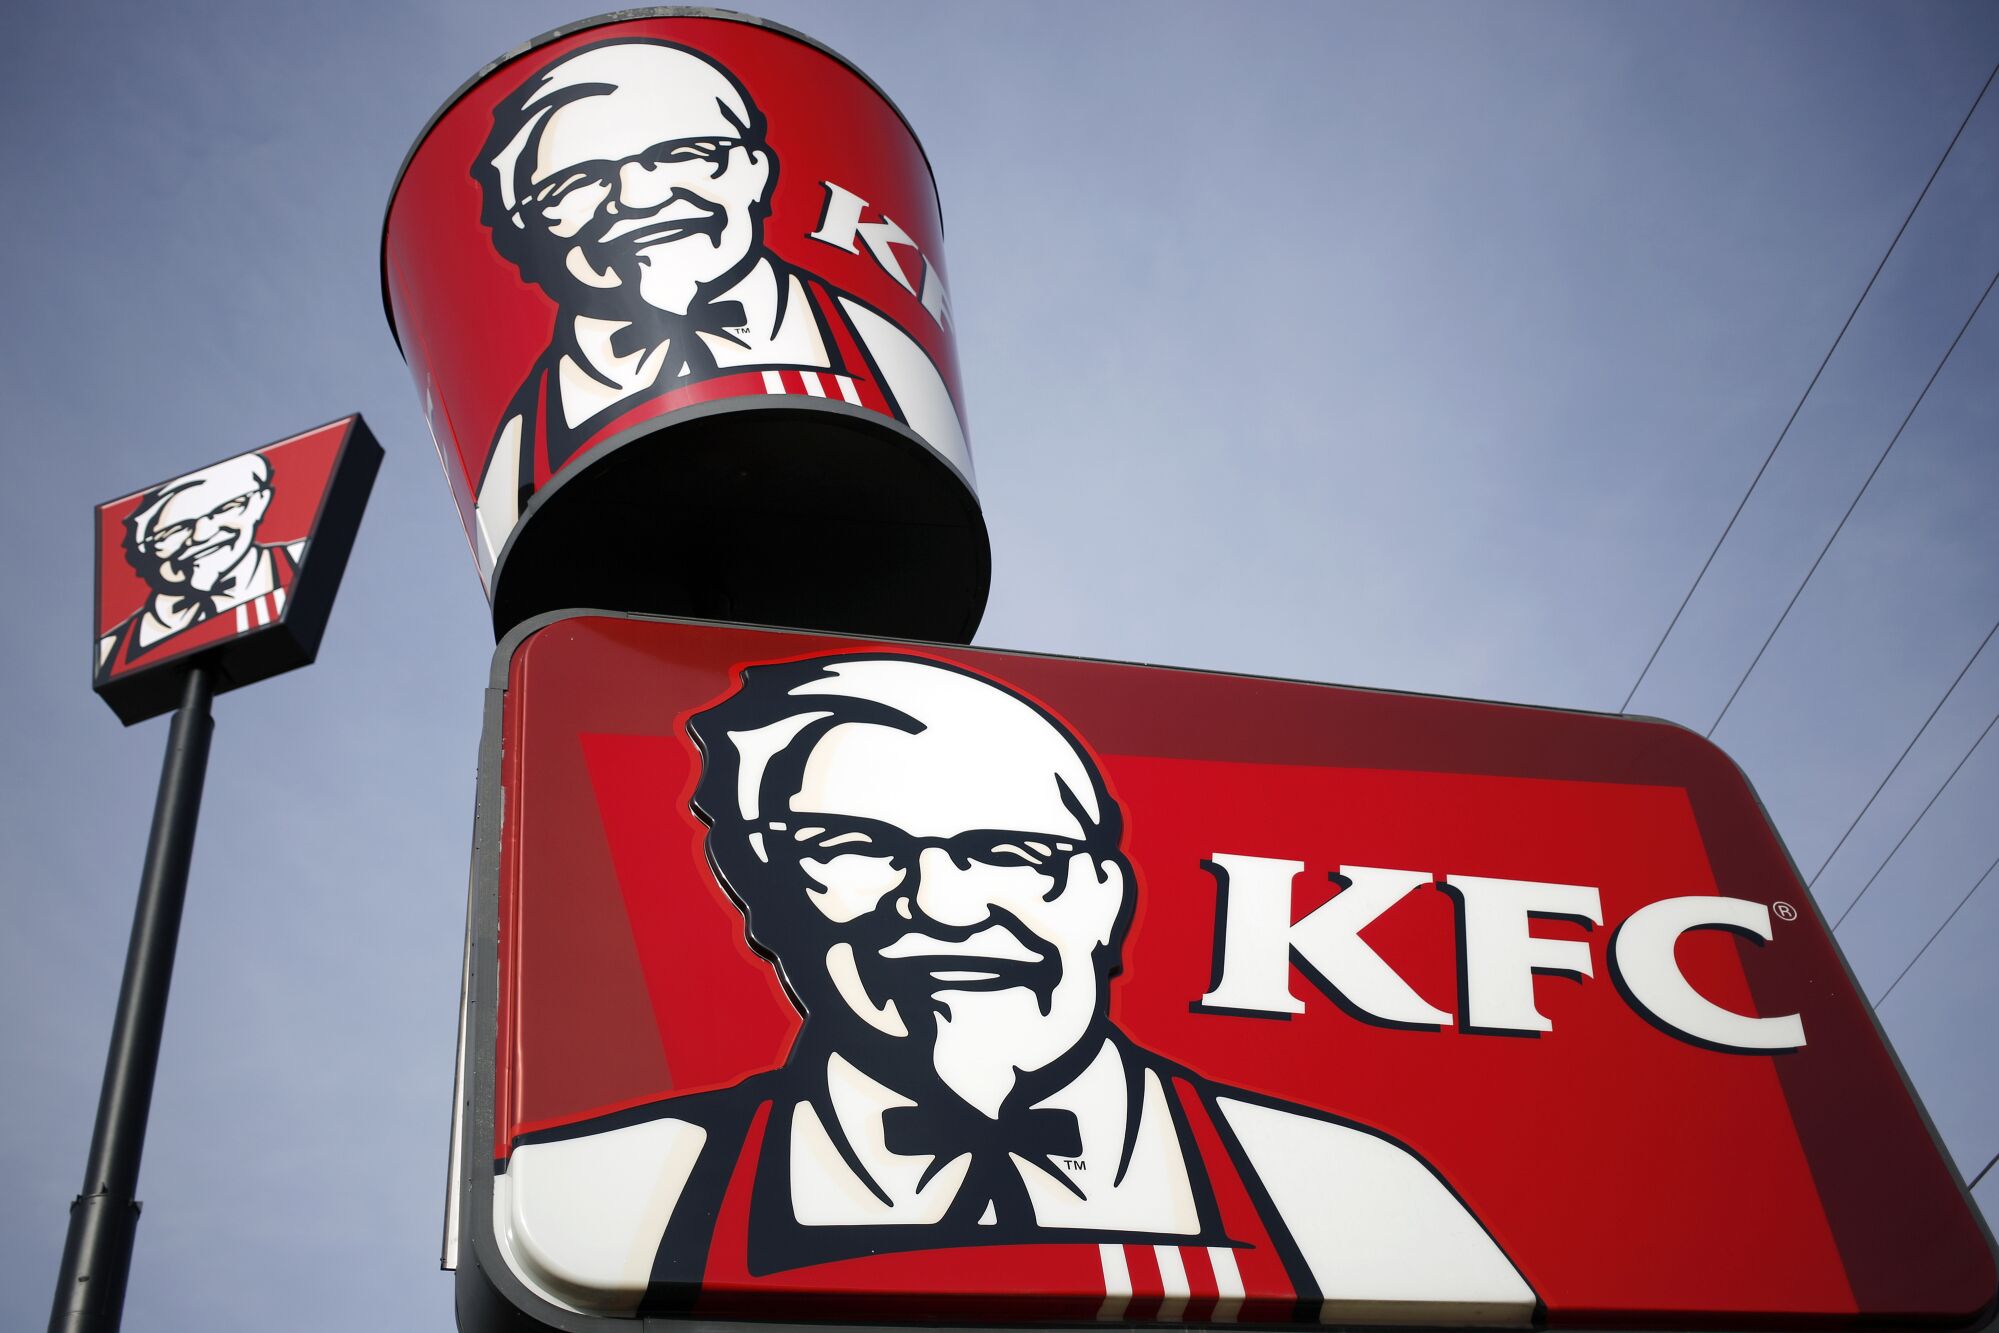 U.K. Chicken-Supply Chaos to Deprive Britons of KFC for Days